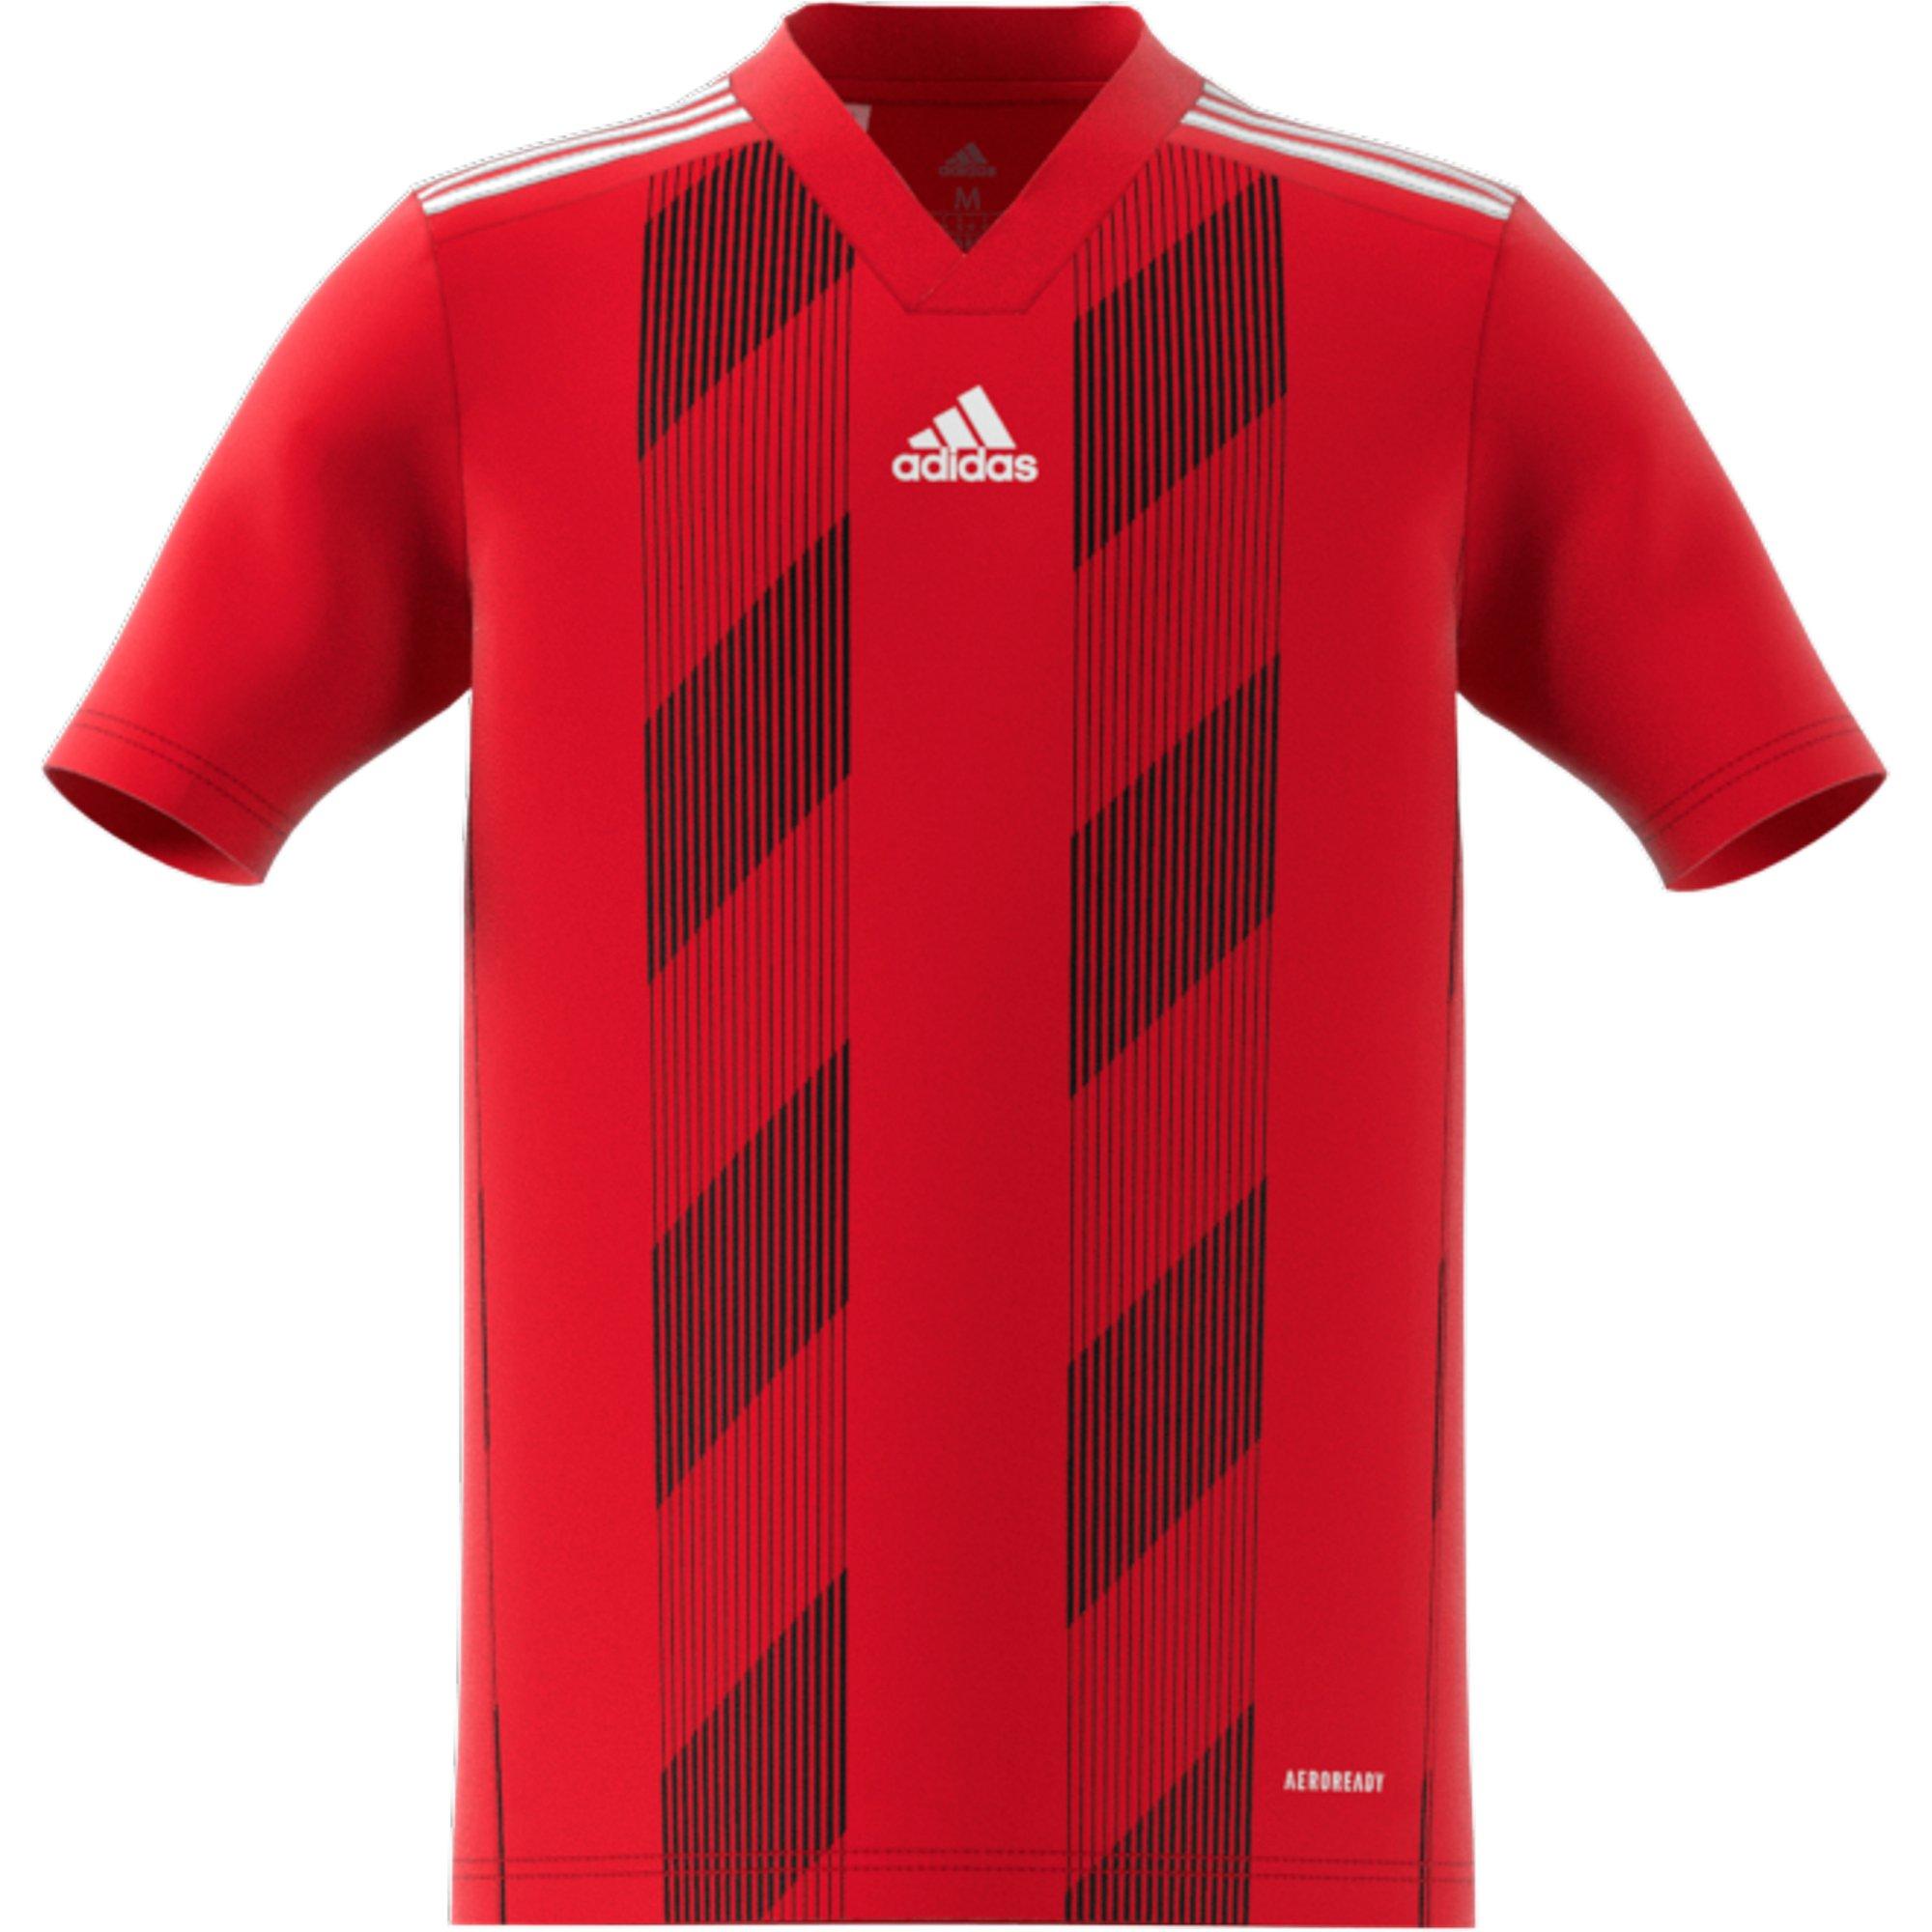 adidas Boy's Striped 19 Soccer Red Jersey